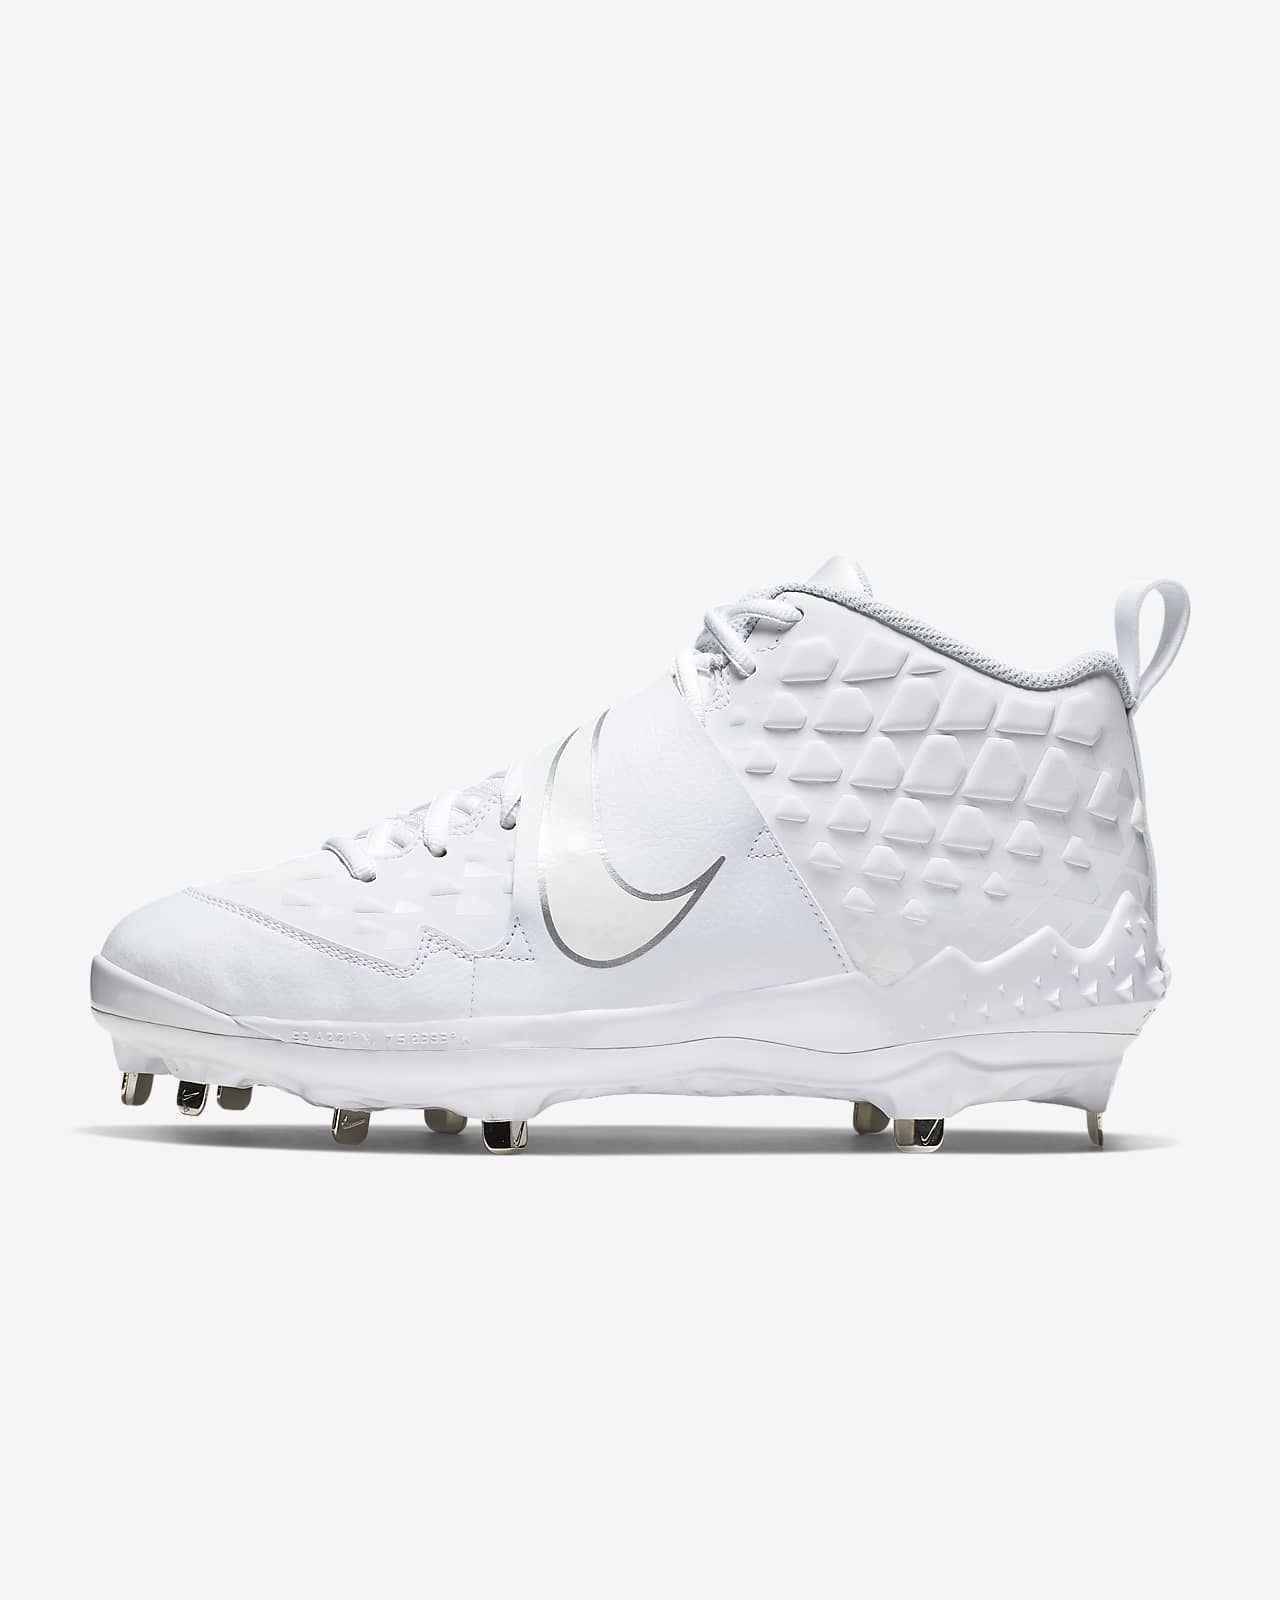 mike trout pro 5 cleats